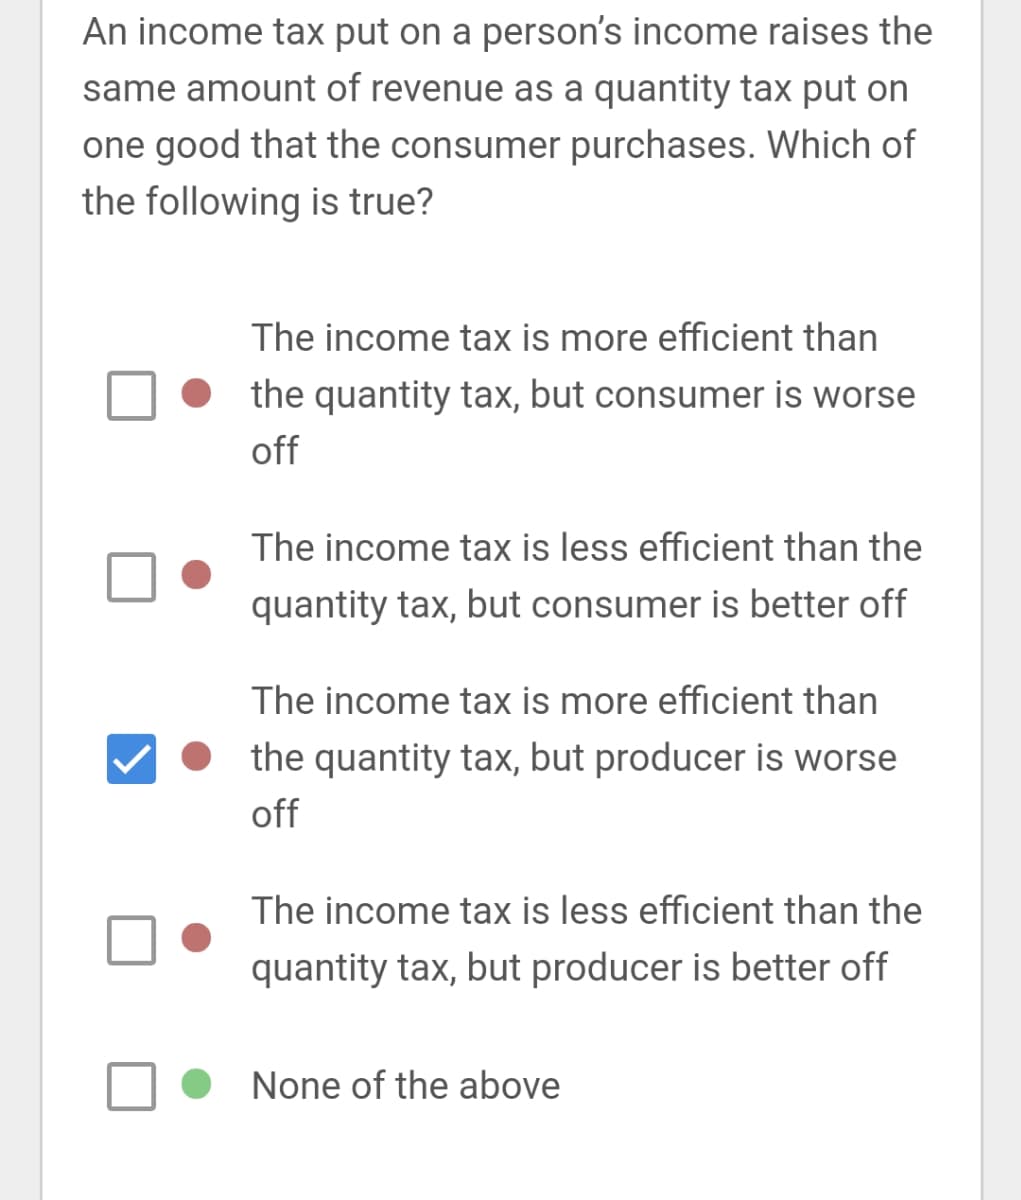 An income tax put on a person's income raises the
same amount of revenue as a quantity tax put on
one good that the consumer purchases. Which of
the following is true?
The income tax is more efficient than
the quantity tax, but consumer is worse
off
The income tax is less efficient than the
quantity tax, but consumer is better off
The income tax is more efficient than
the quantity tax, but producer is worse
off
The income tax is less efficient than the
quantity tax, but producer is better off
None of the above